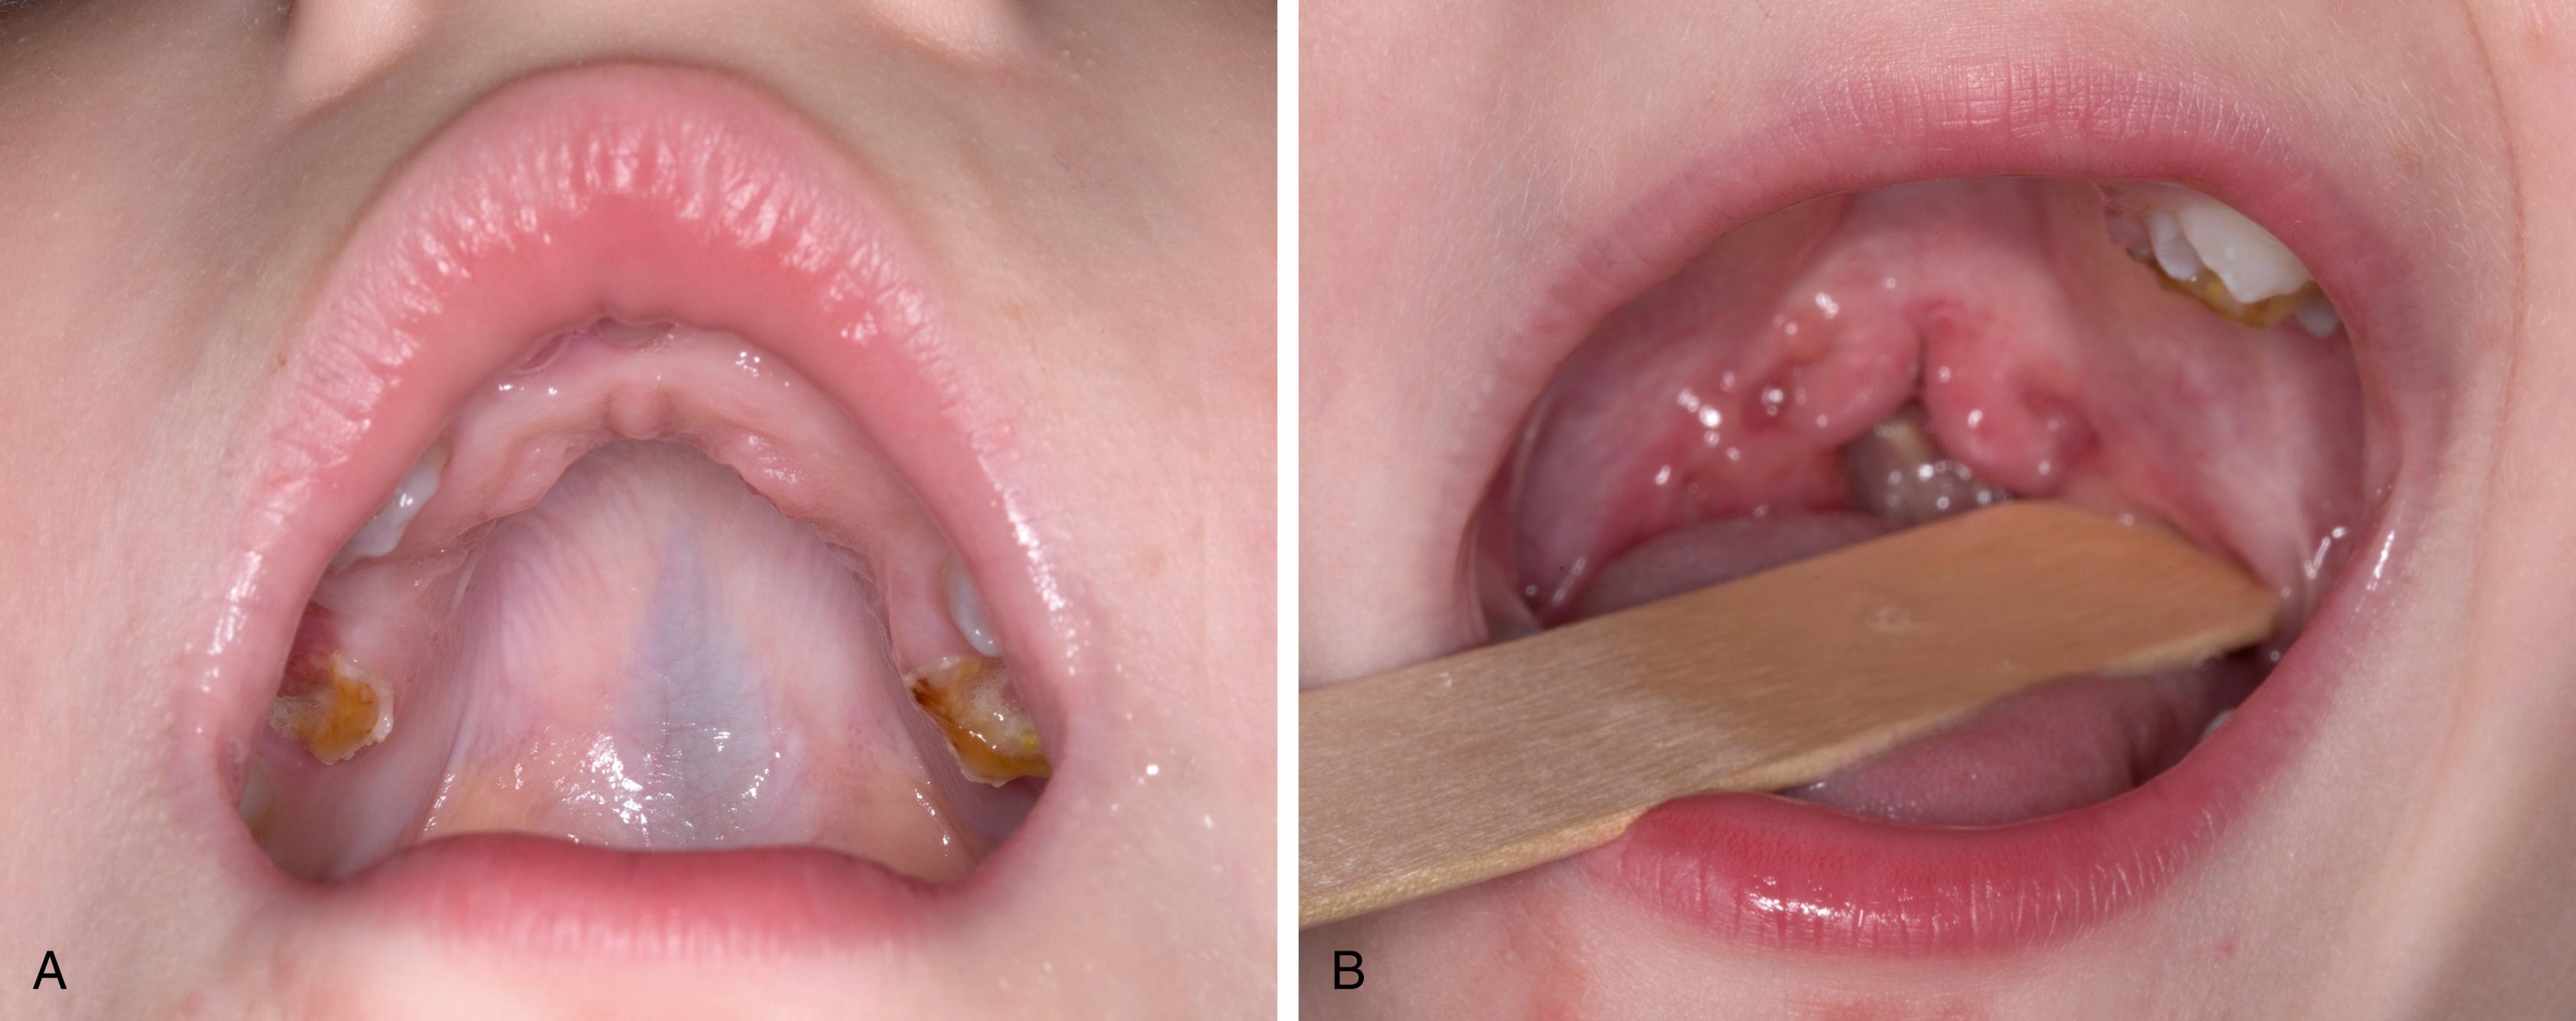 Fig. 17.3, (A) Clinical image of an overt submucous cleft palate, (B) demonstrating the zona pellucidum and bifid uvula.